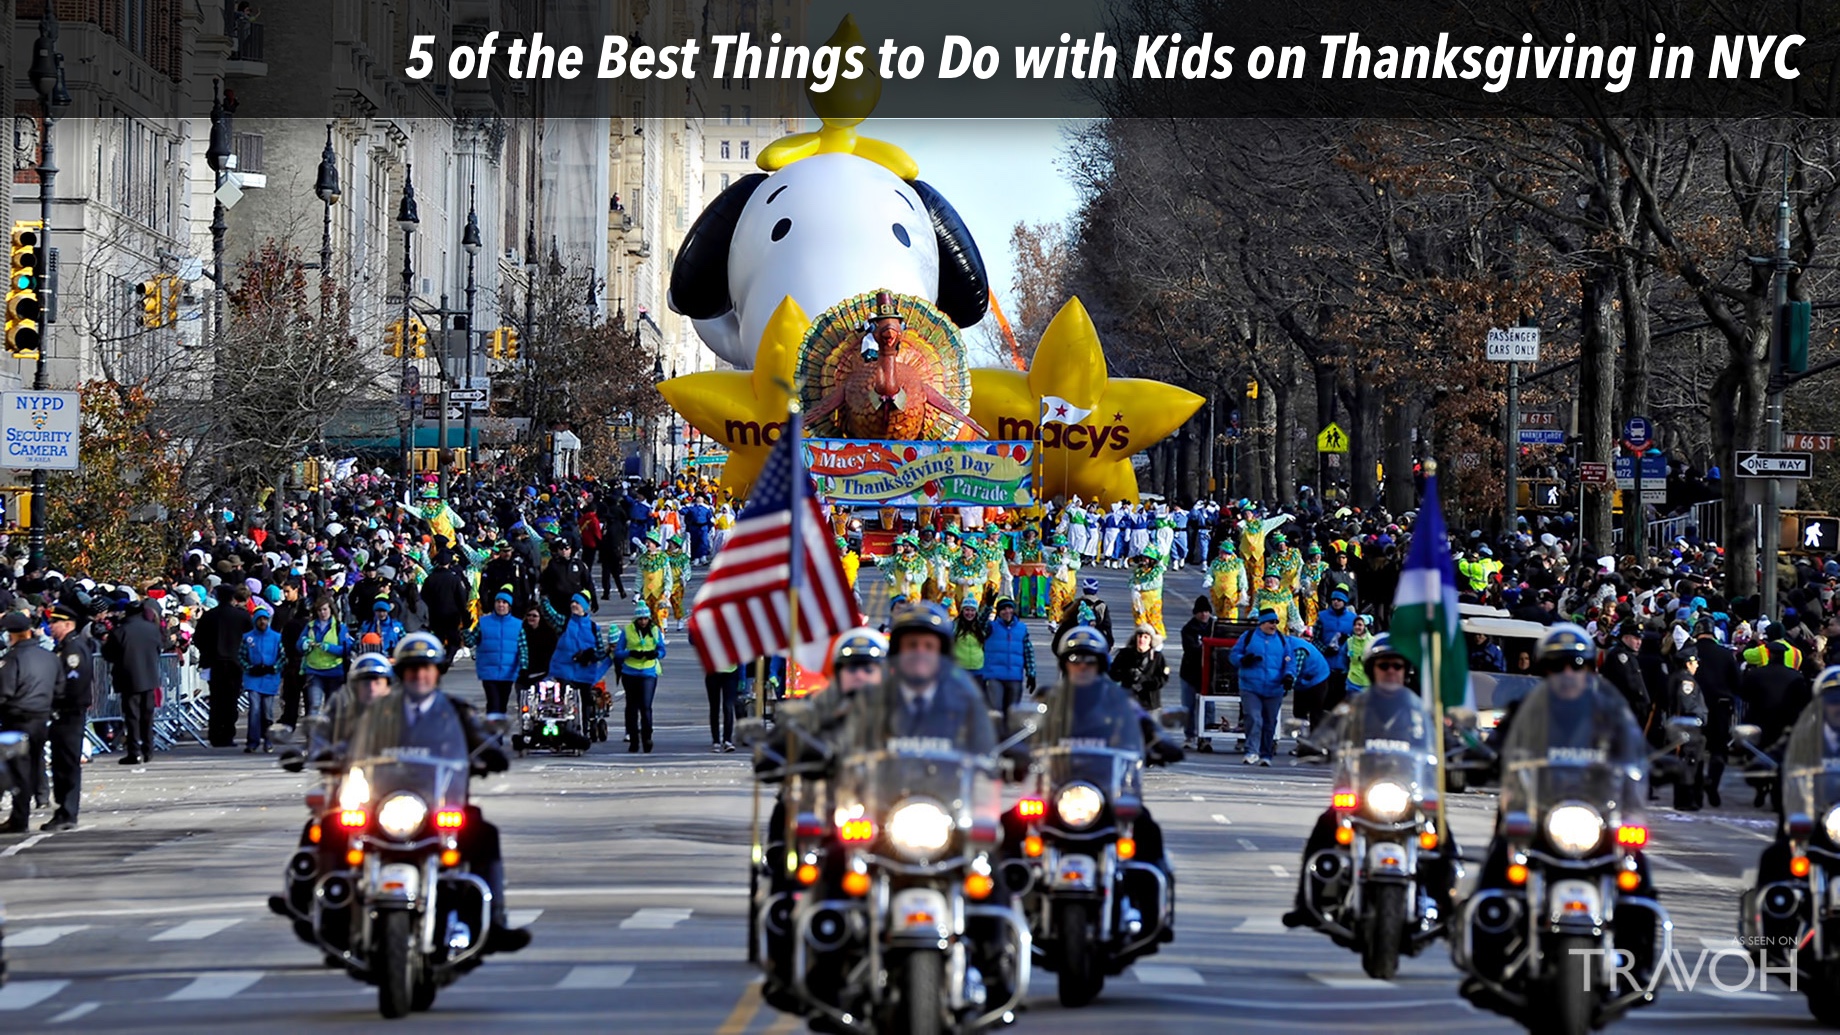 5 of the Best Things to Do with Kids on Thanksgiving in NYC